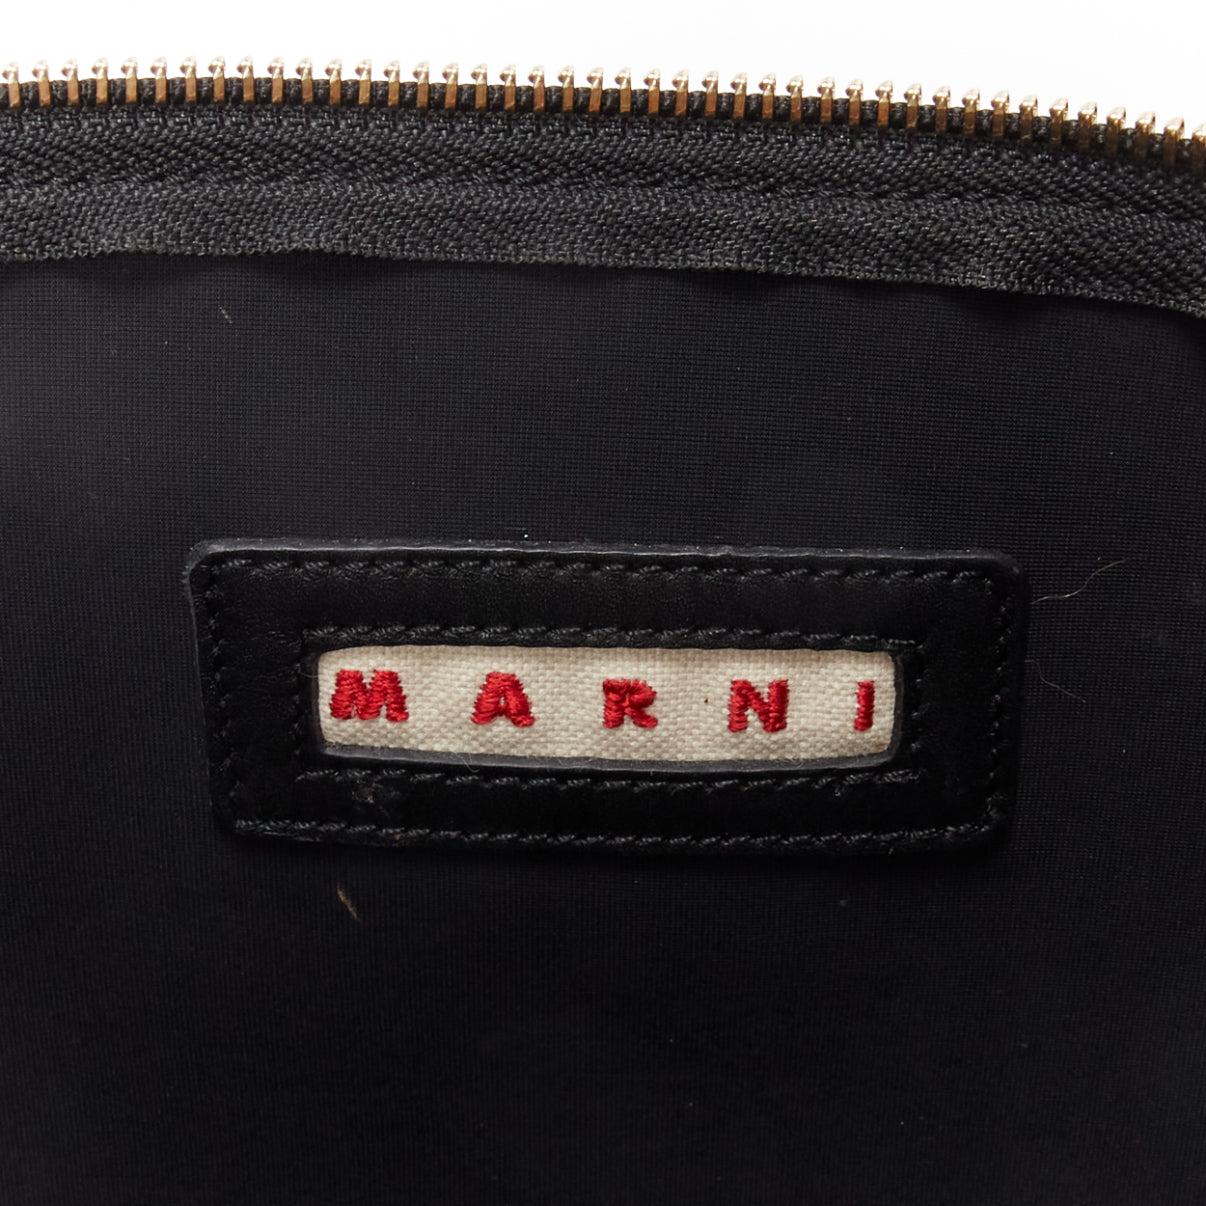 MARNI beige black smooth leather gold stud buckle dual oversized zip clutch bag For Sale 5